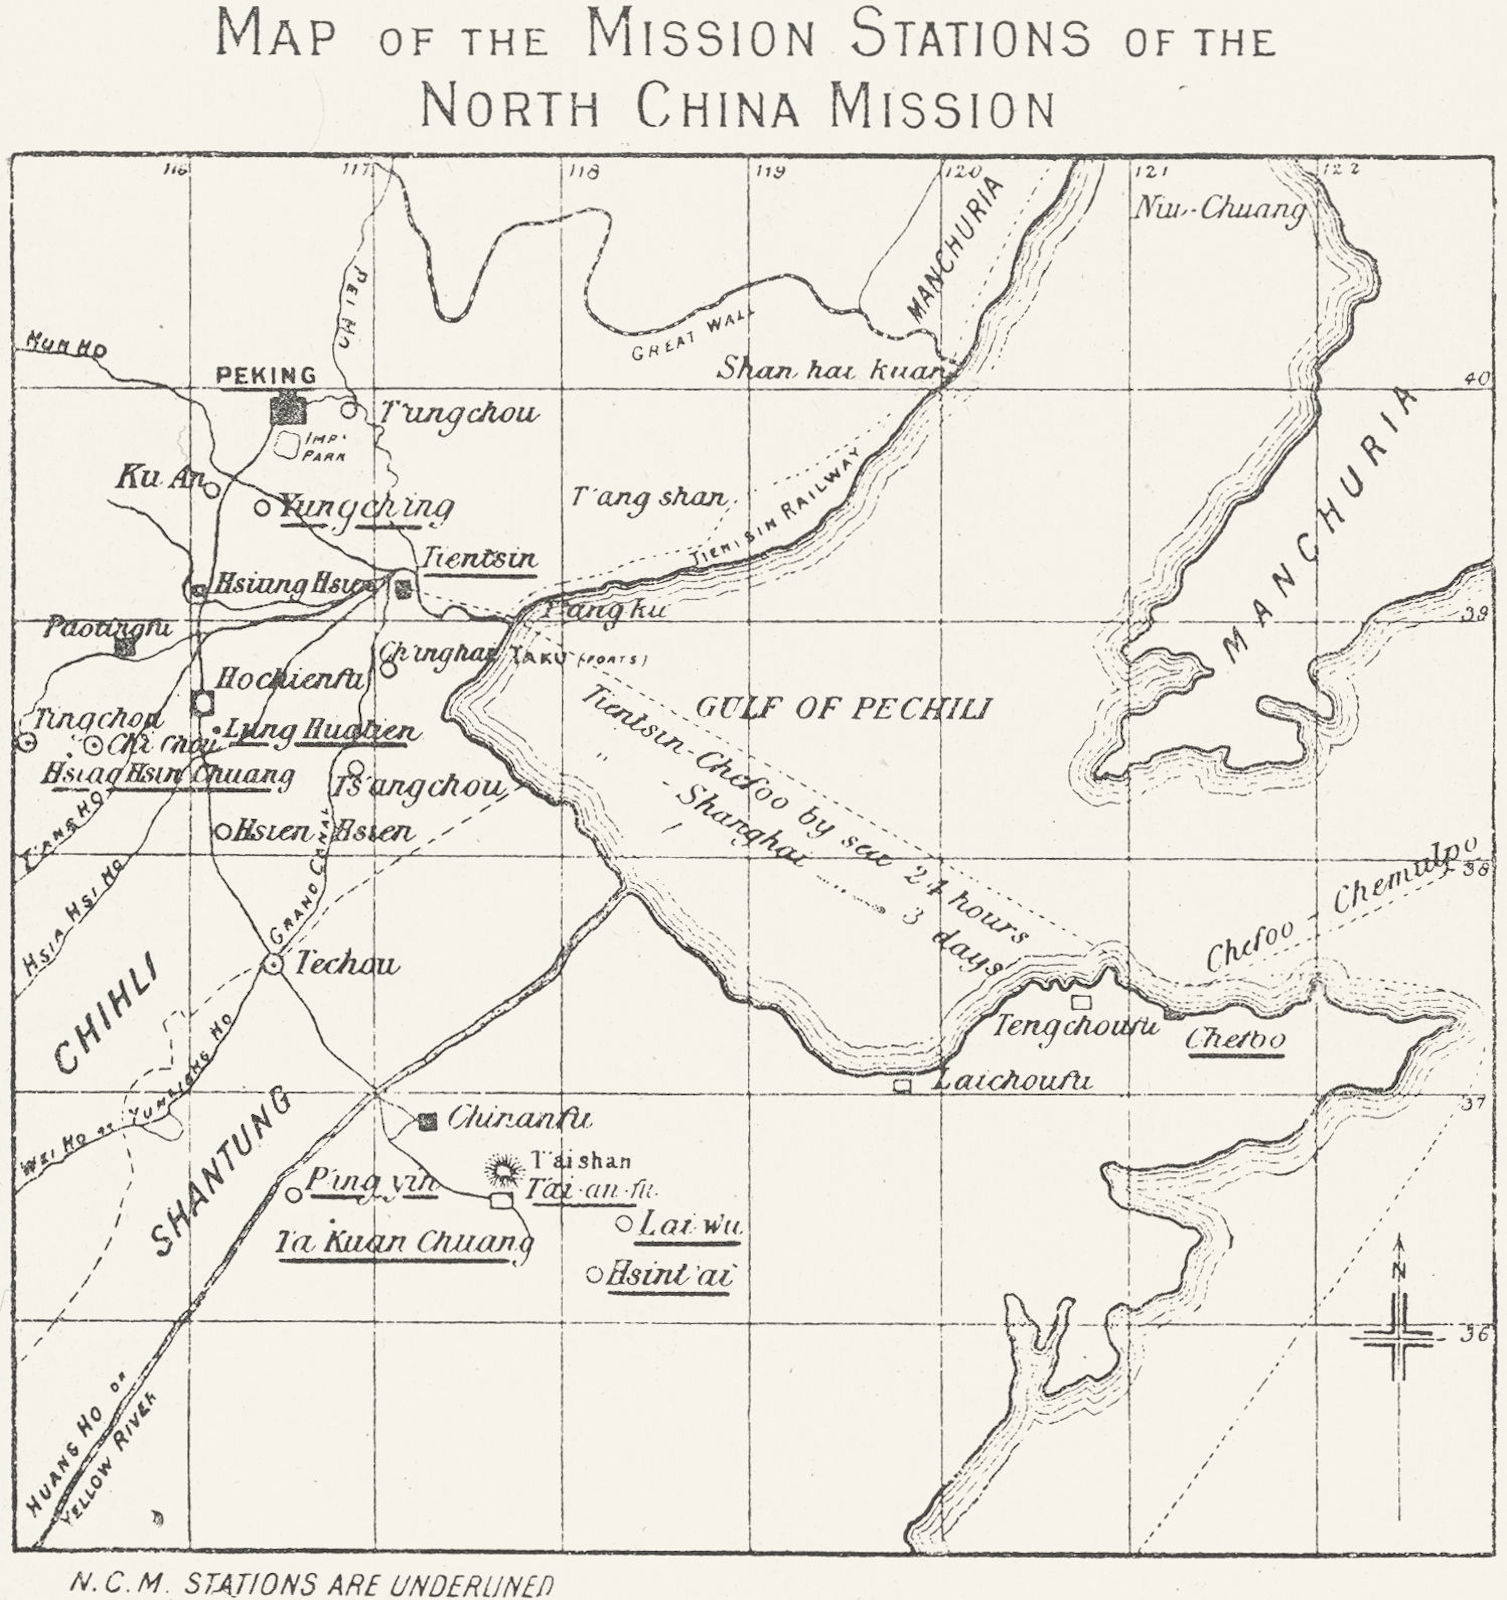 NORTH CHINA ANGLICAN MISSION STATIONS. Protestant church. Peking 1897 old map